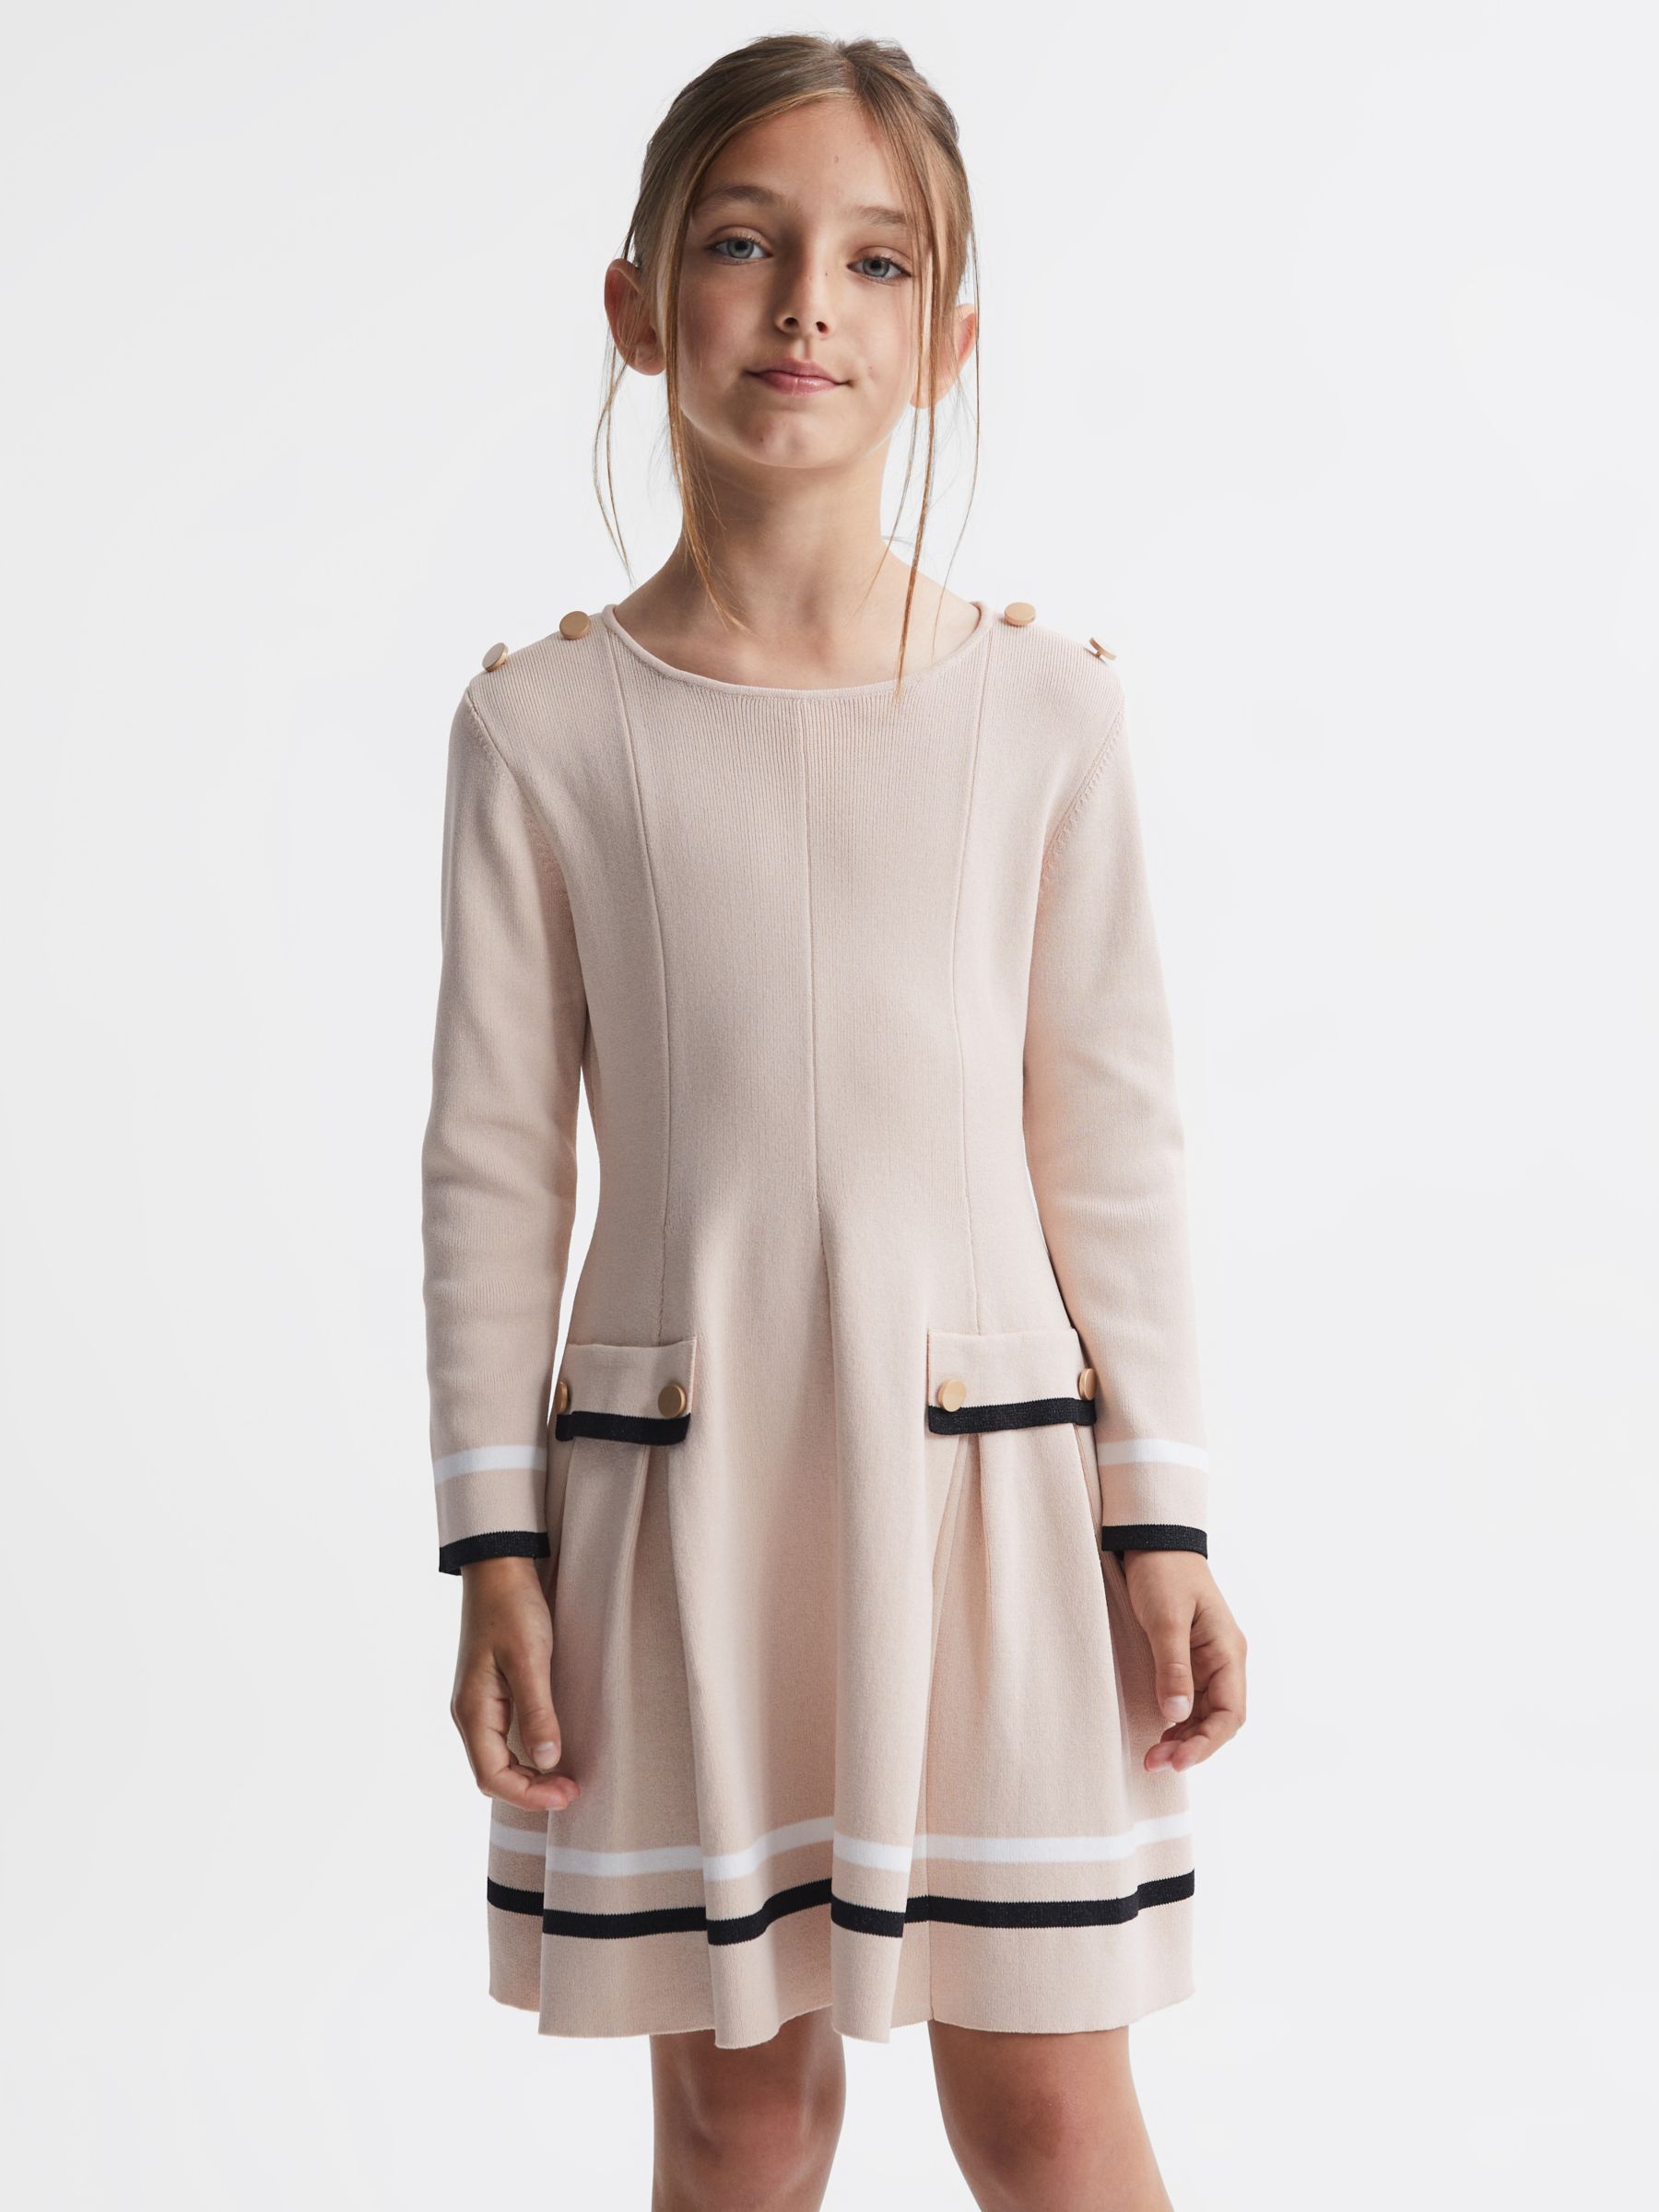 Reiss Kids' Paige Knitted Stripe Dress, Pink at John Lewis & Partners